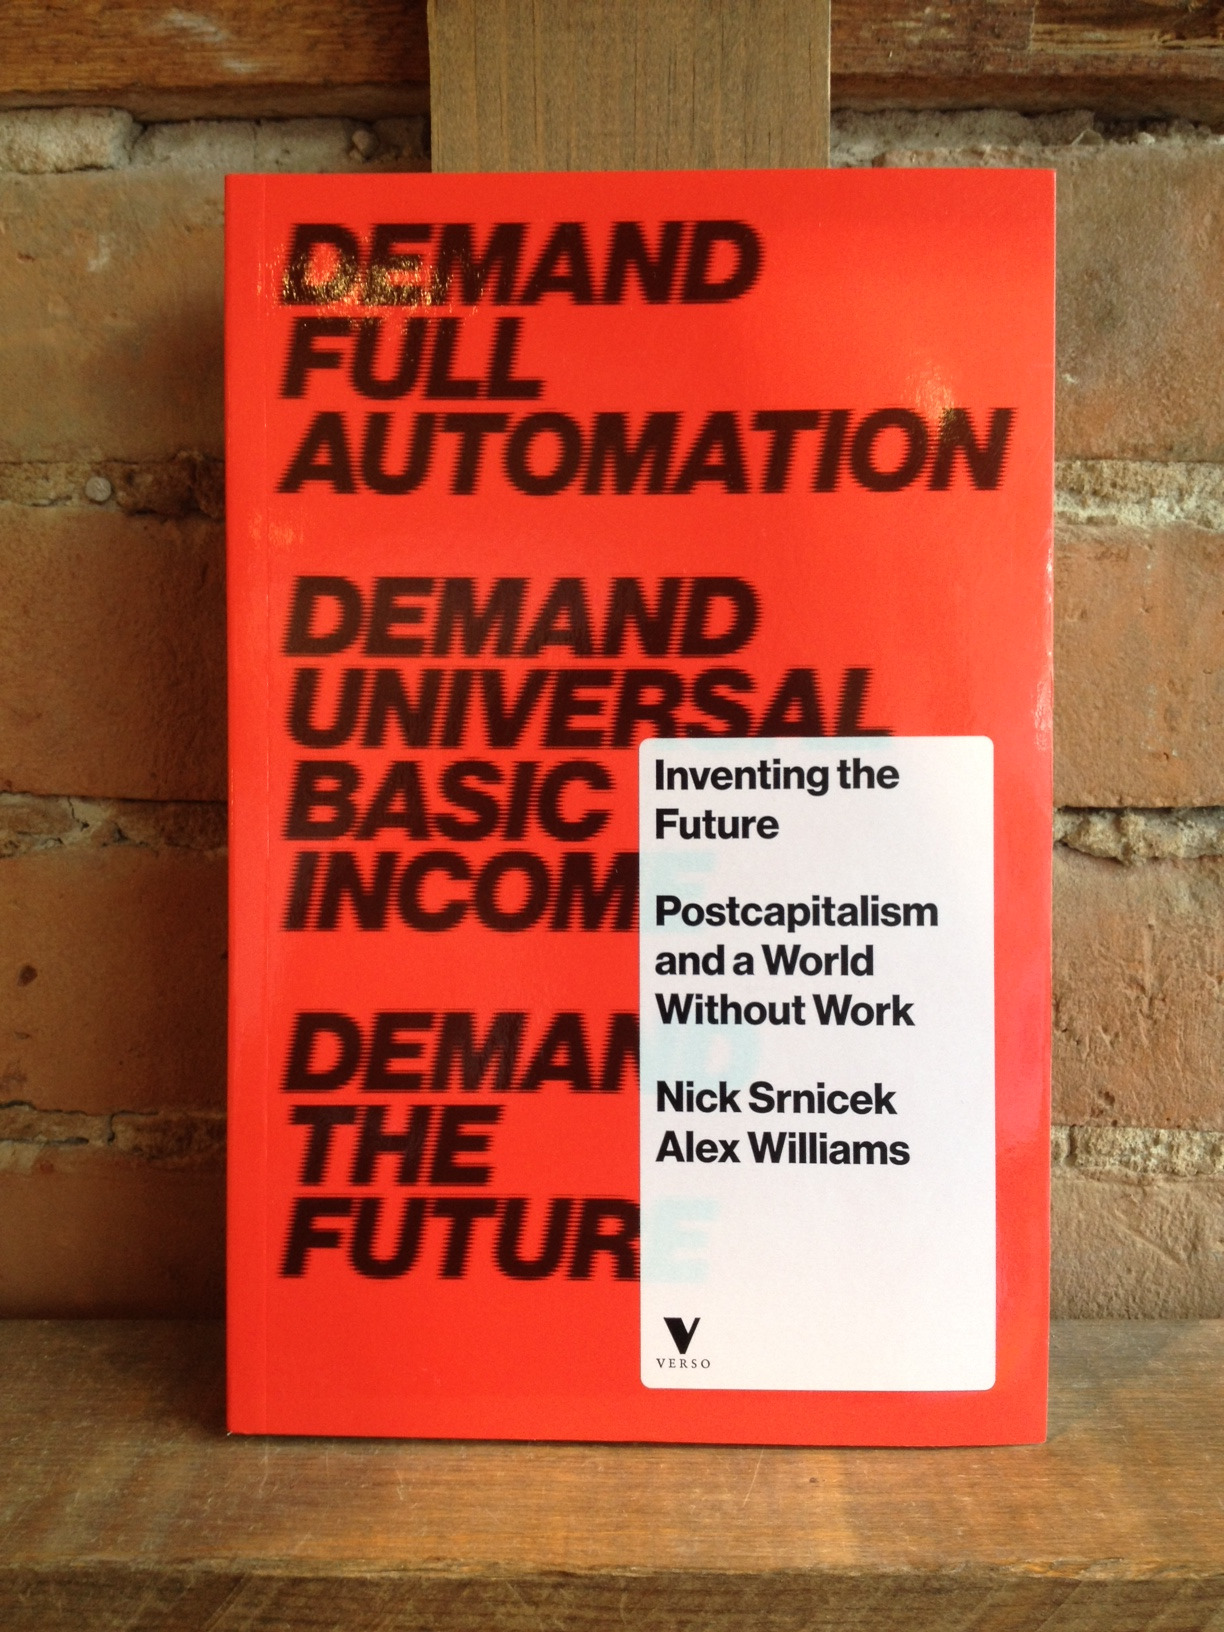 Inventing The Future: Postcapitalism and a World Without Work